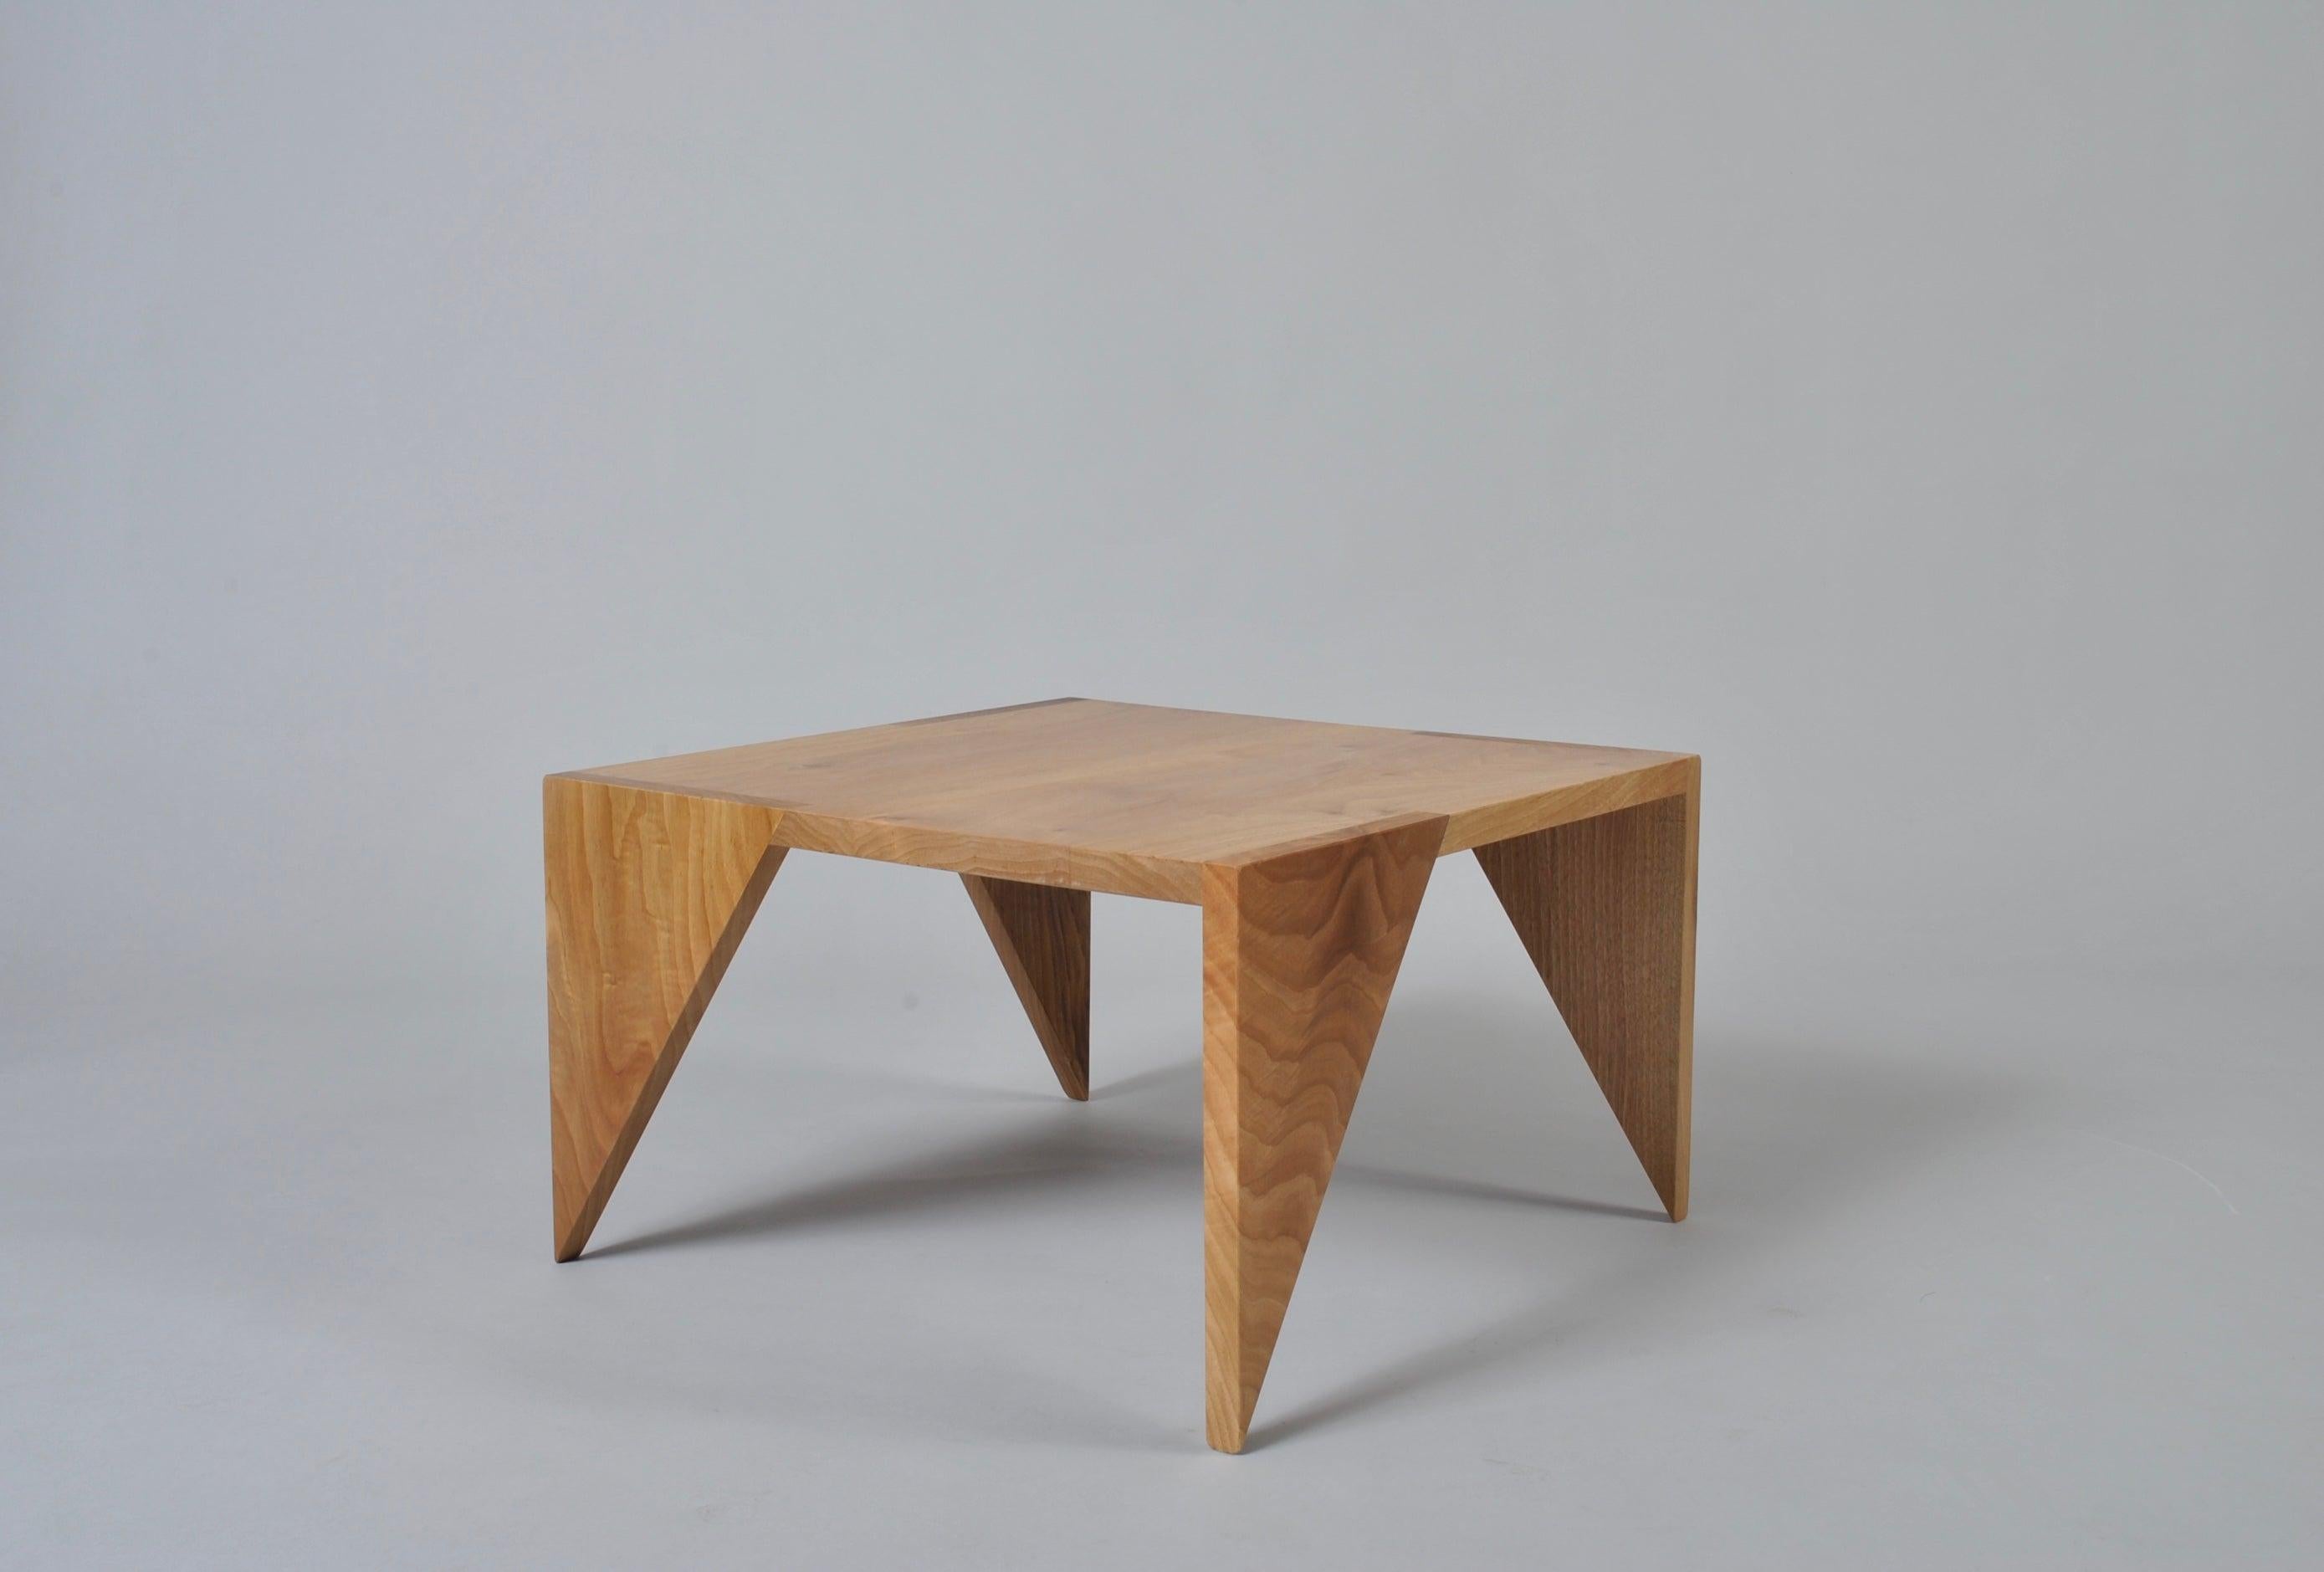 Hand-Crafted Handcrafted English Walnut Modernist Table